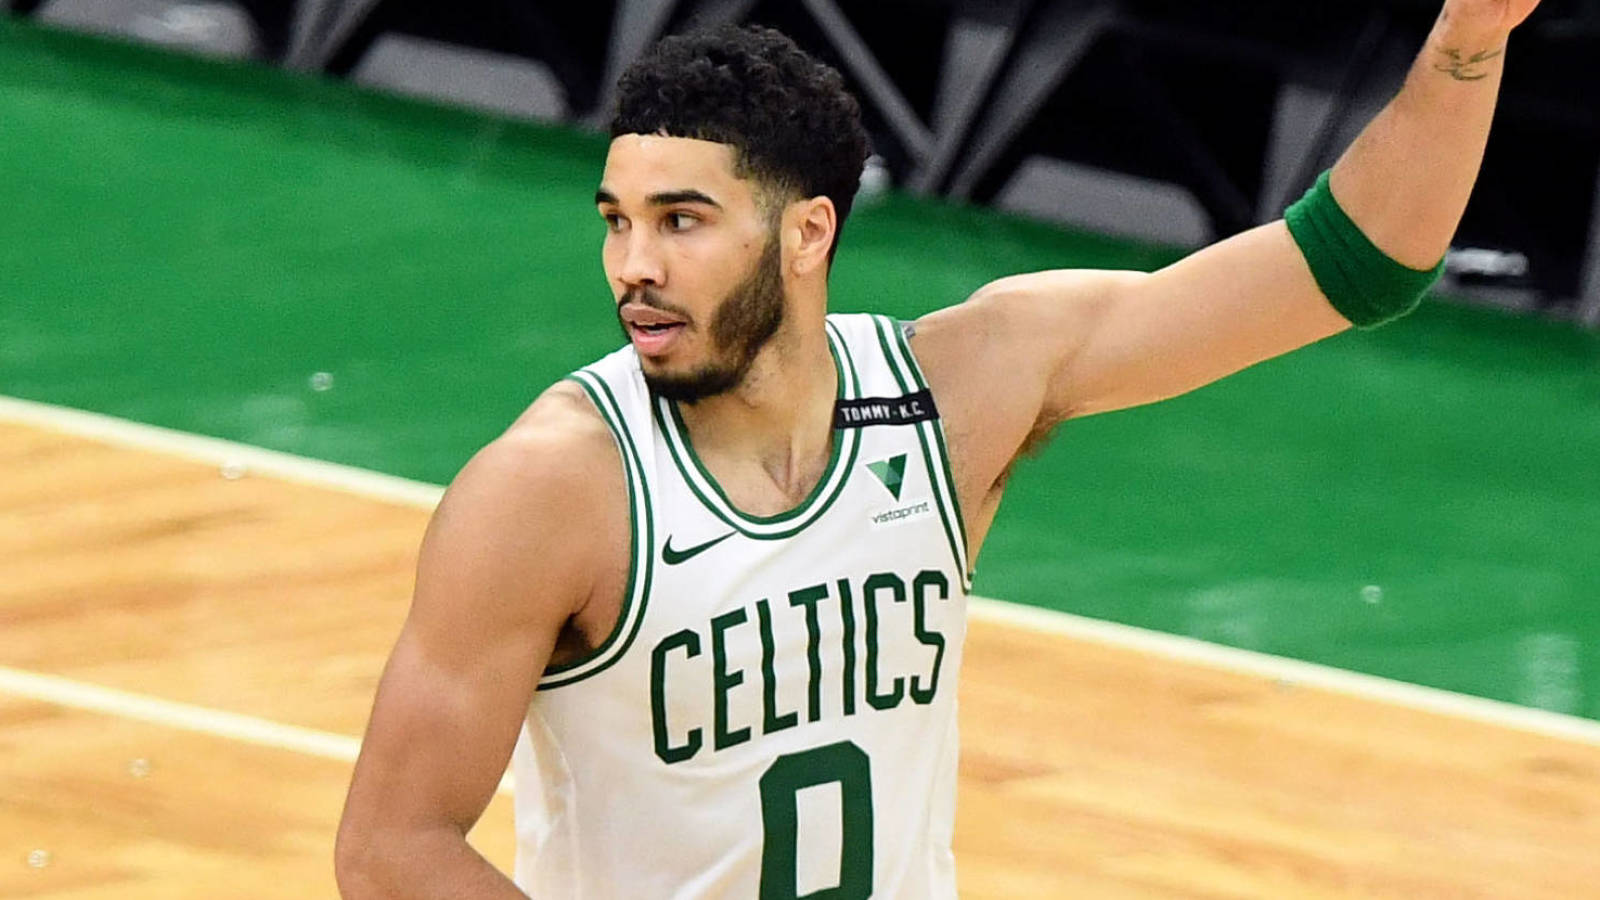 Celtics star Jayson Tatum reportedly commits to play for Team USA at Tokyo Olympics